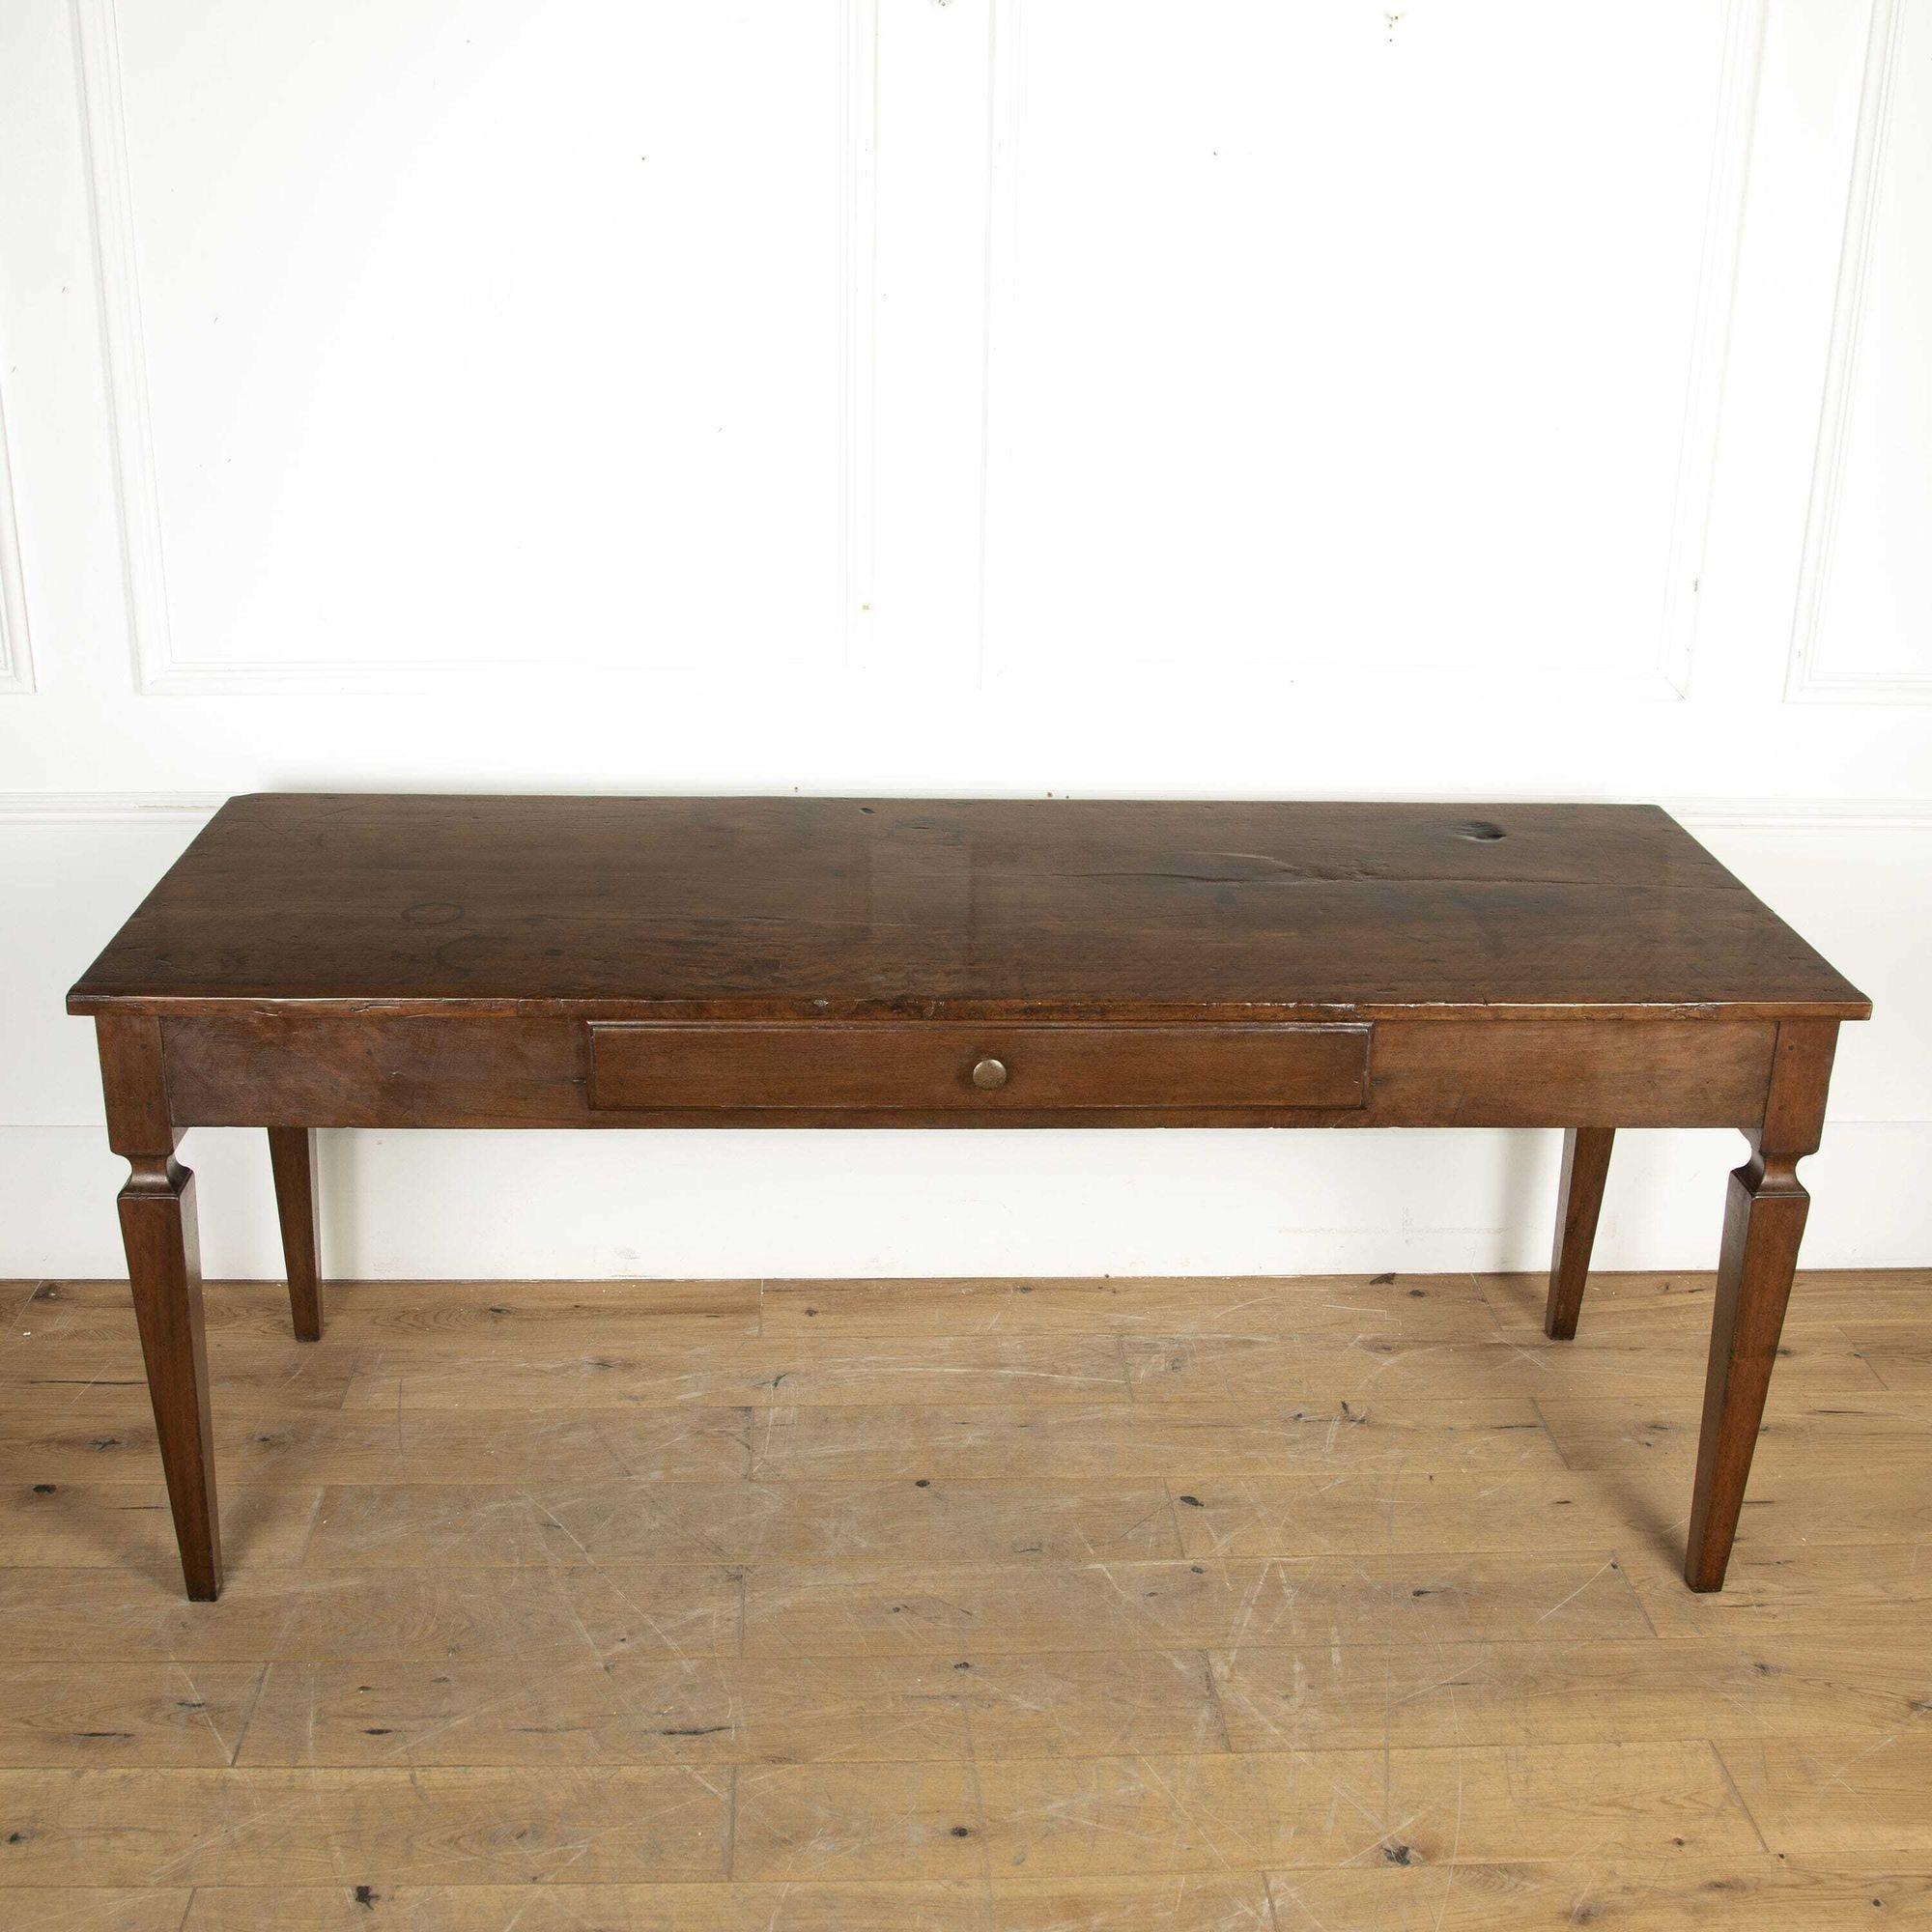 19th century Italian walnut serving table from Venice.
With a single drawer on the front and attractive shaped legs, this piece has a lovely patina but does have a few marks on the top commensurate with age.
This fabulous serving table would look